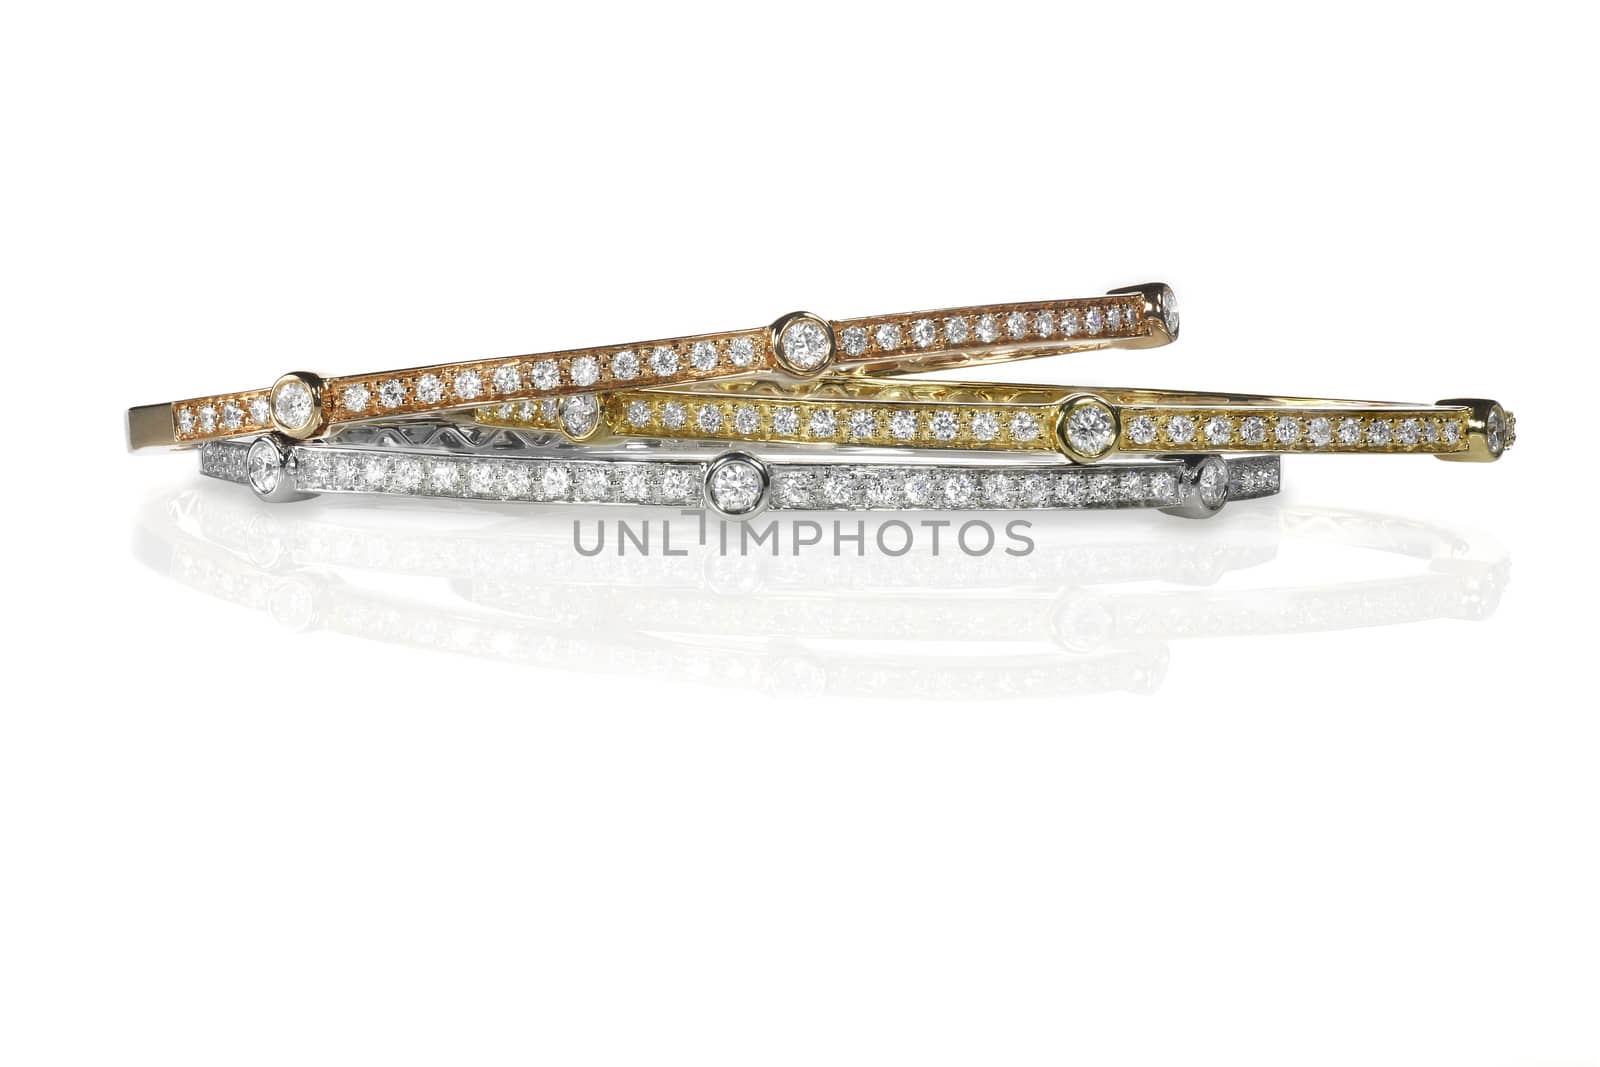 Set of three colored gold and diamond bracelets stacked isolated on white with a reflection